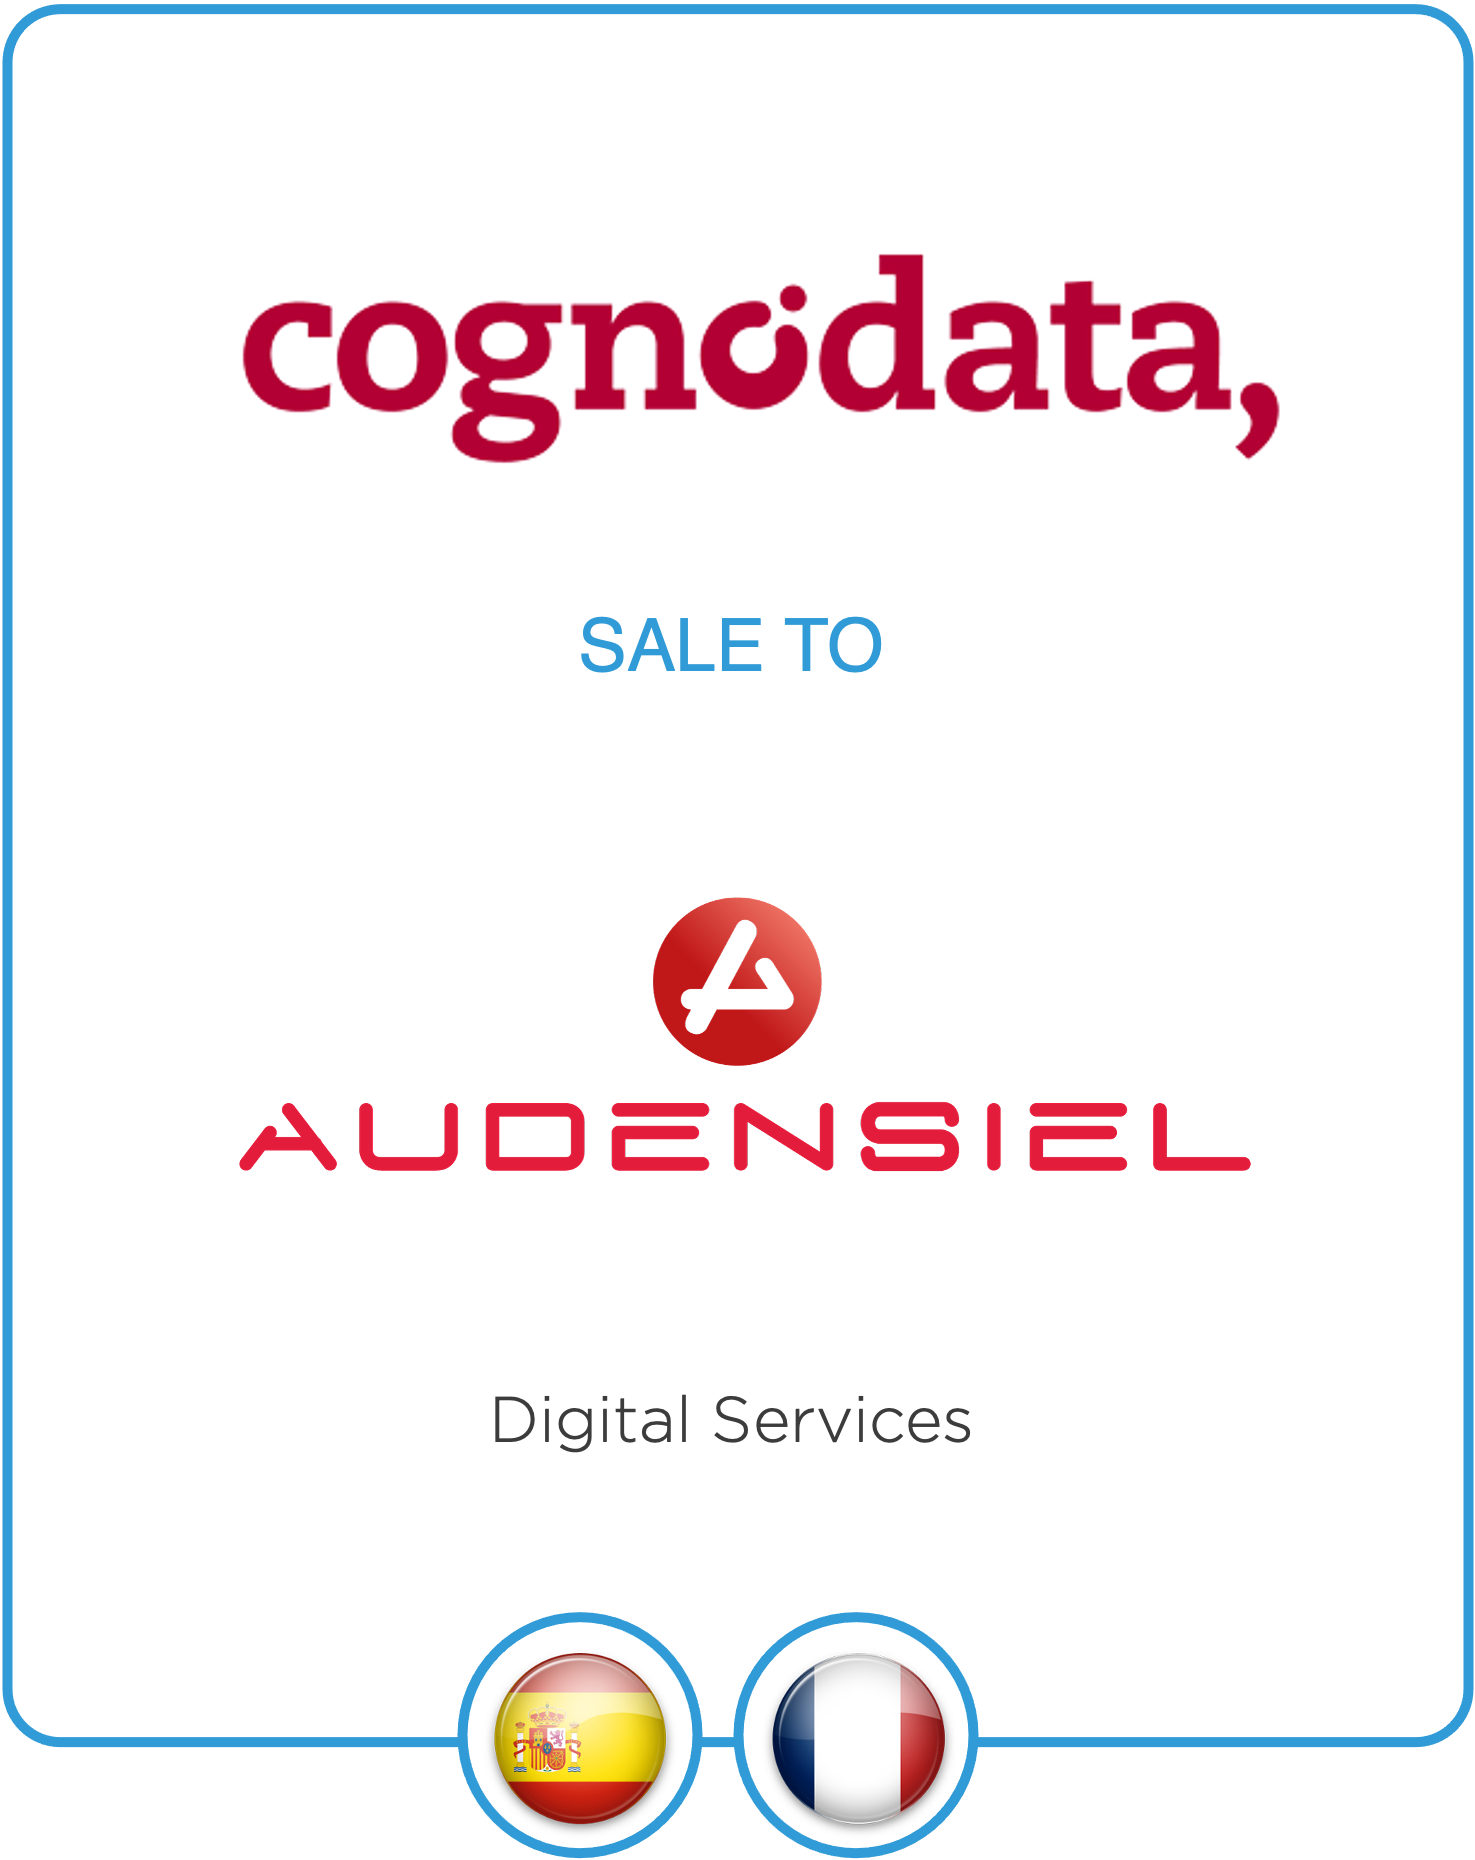 Drake Star Acts as Exclusive Financial Advisor to Cognodata on its sale of a significant equity stake to Audensiel